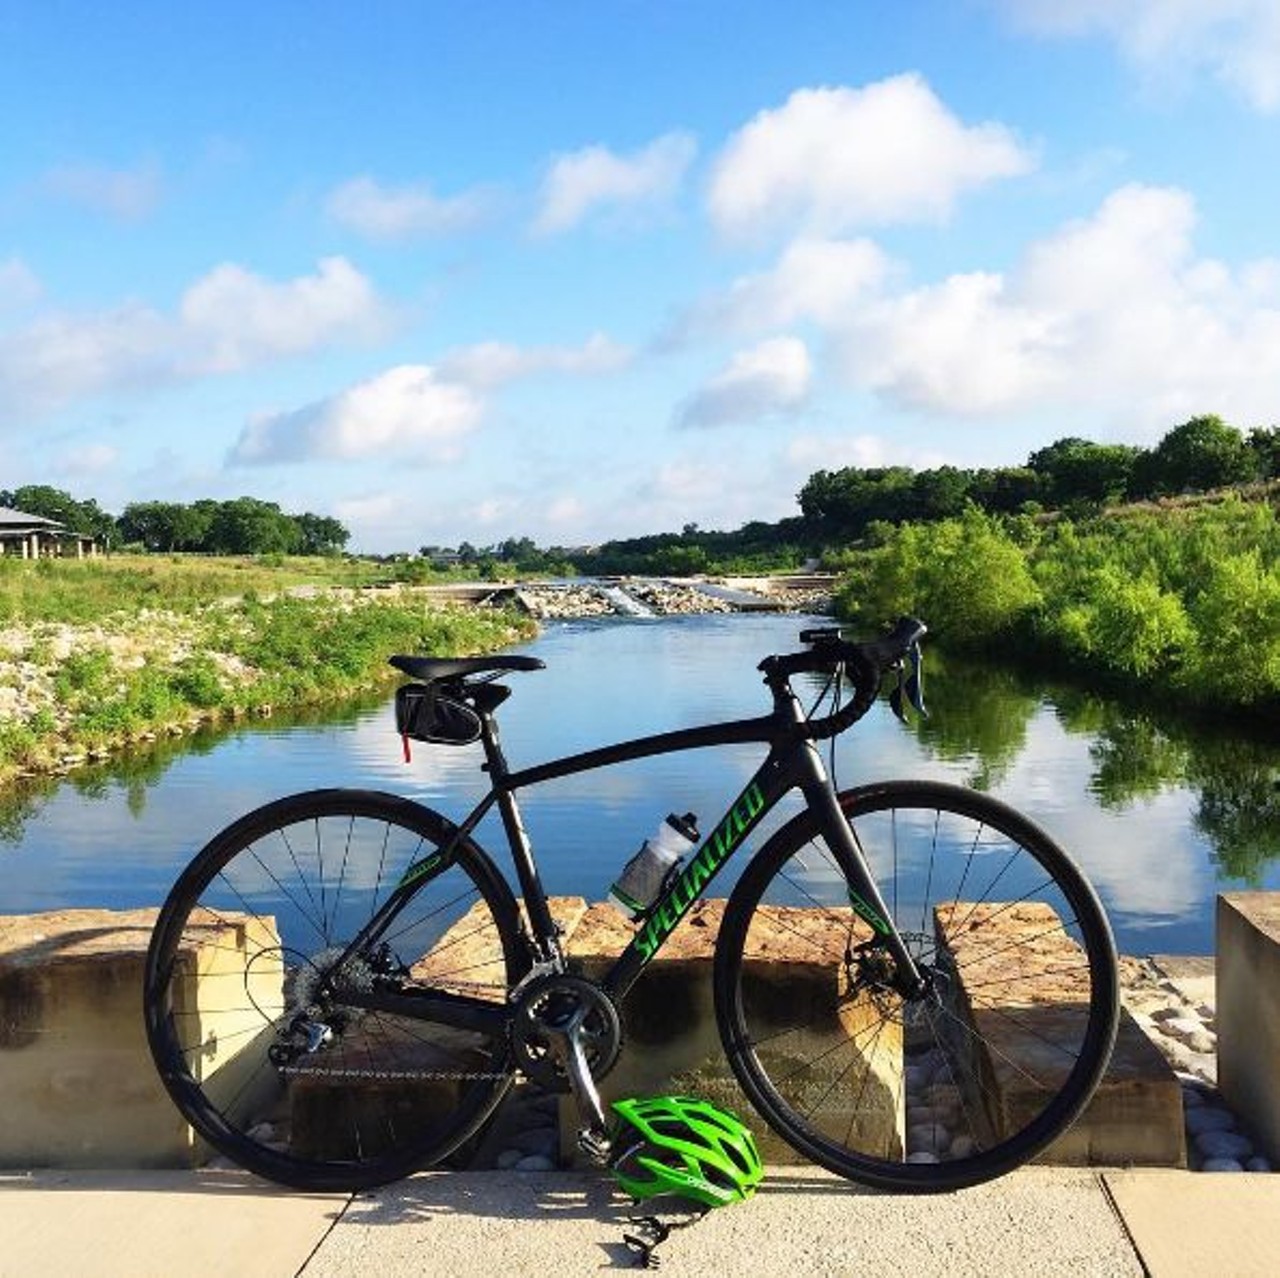 Run, jog or bike through Mission Reach
6701 San Jose Dr., (210) 534-8875, nps.gov
Spend some time along the river, get active, learn more about the missions and explore San Antonio just by hitting up Mission Reach.
Photo via Instagram, louiepreciado